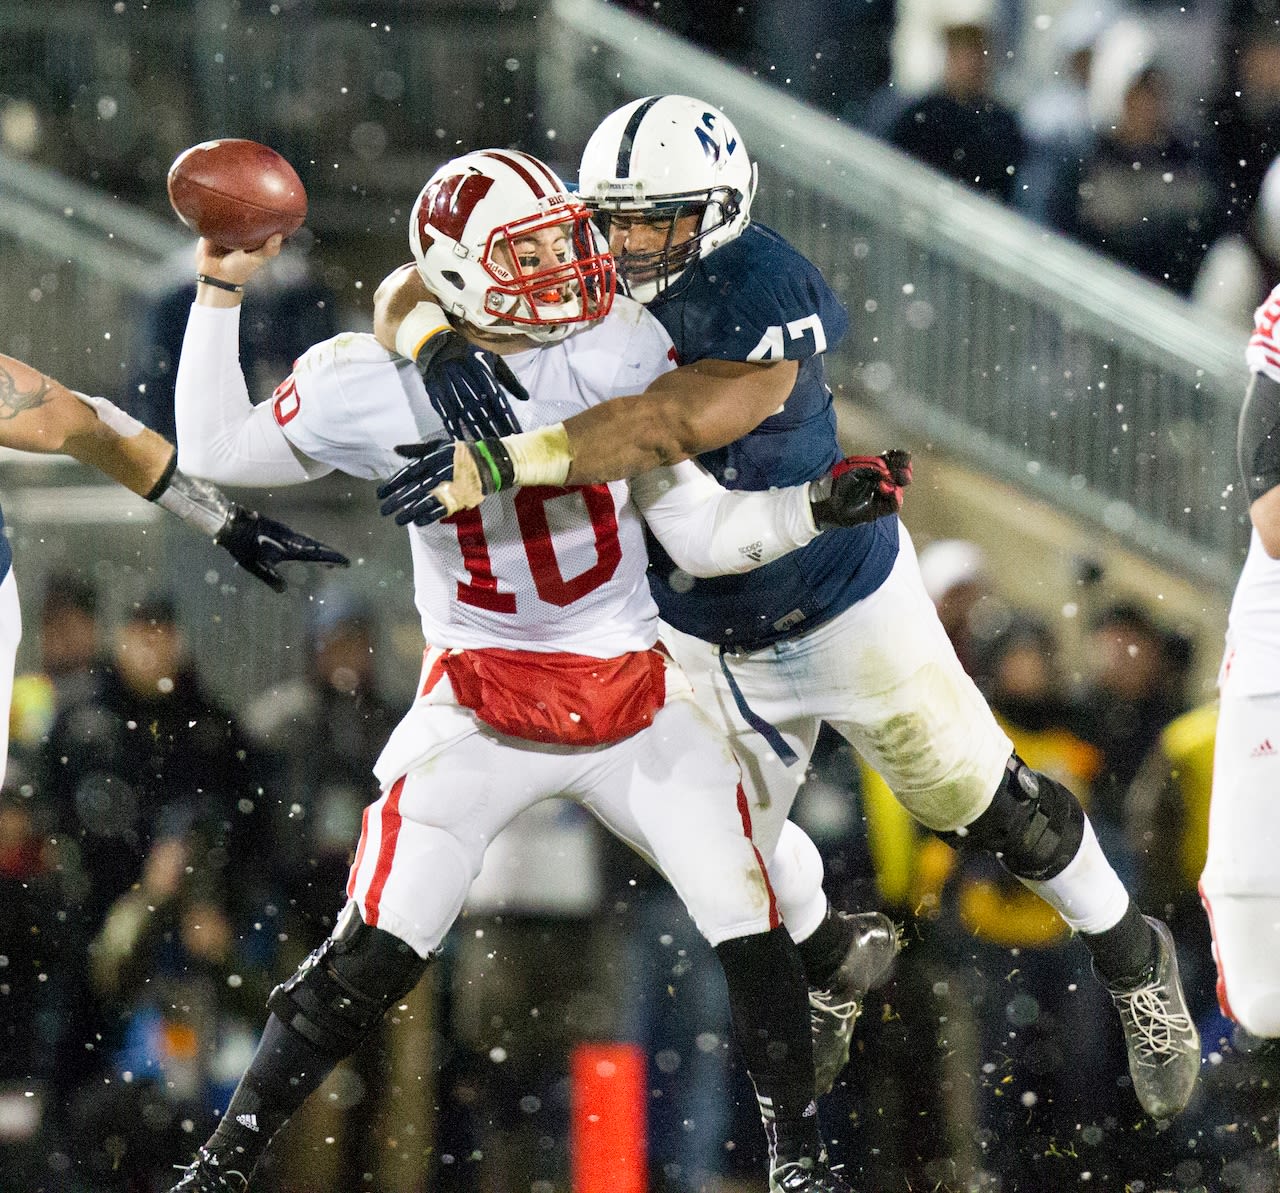 Penn State football set to hire Jordan Hill for new position, per report